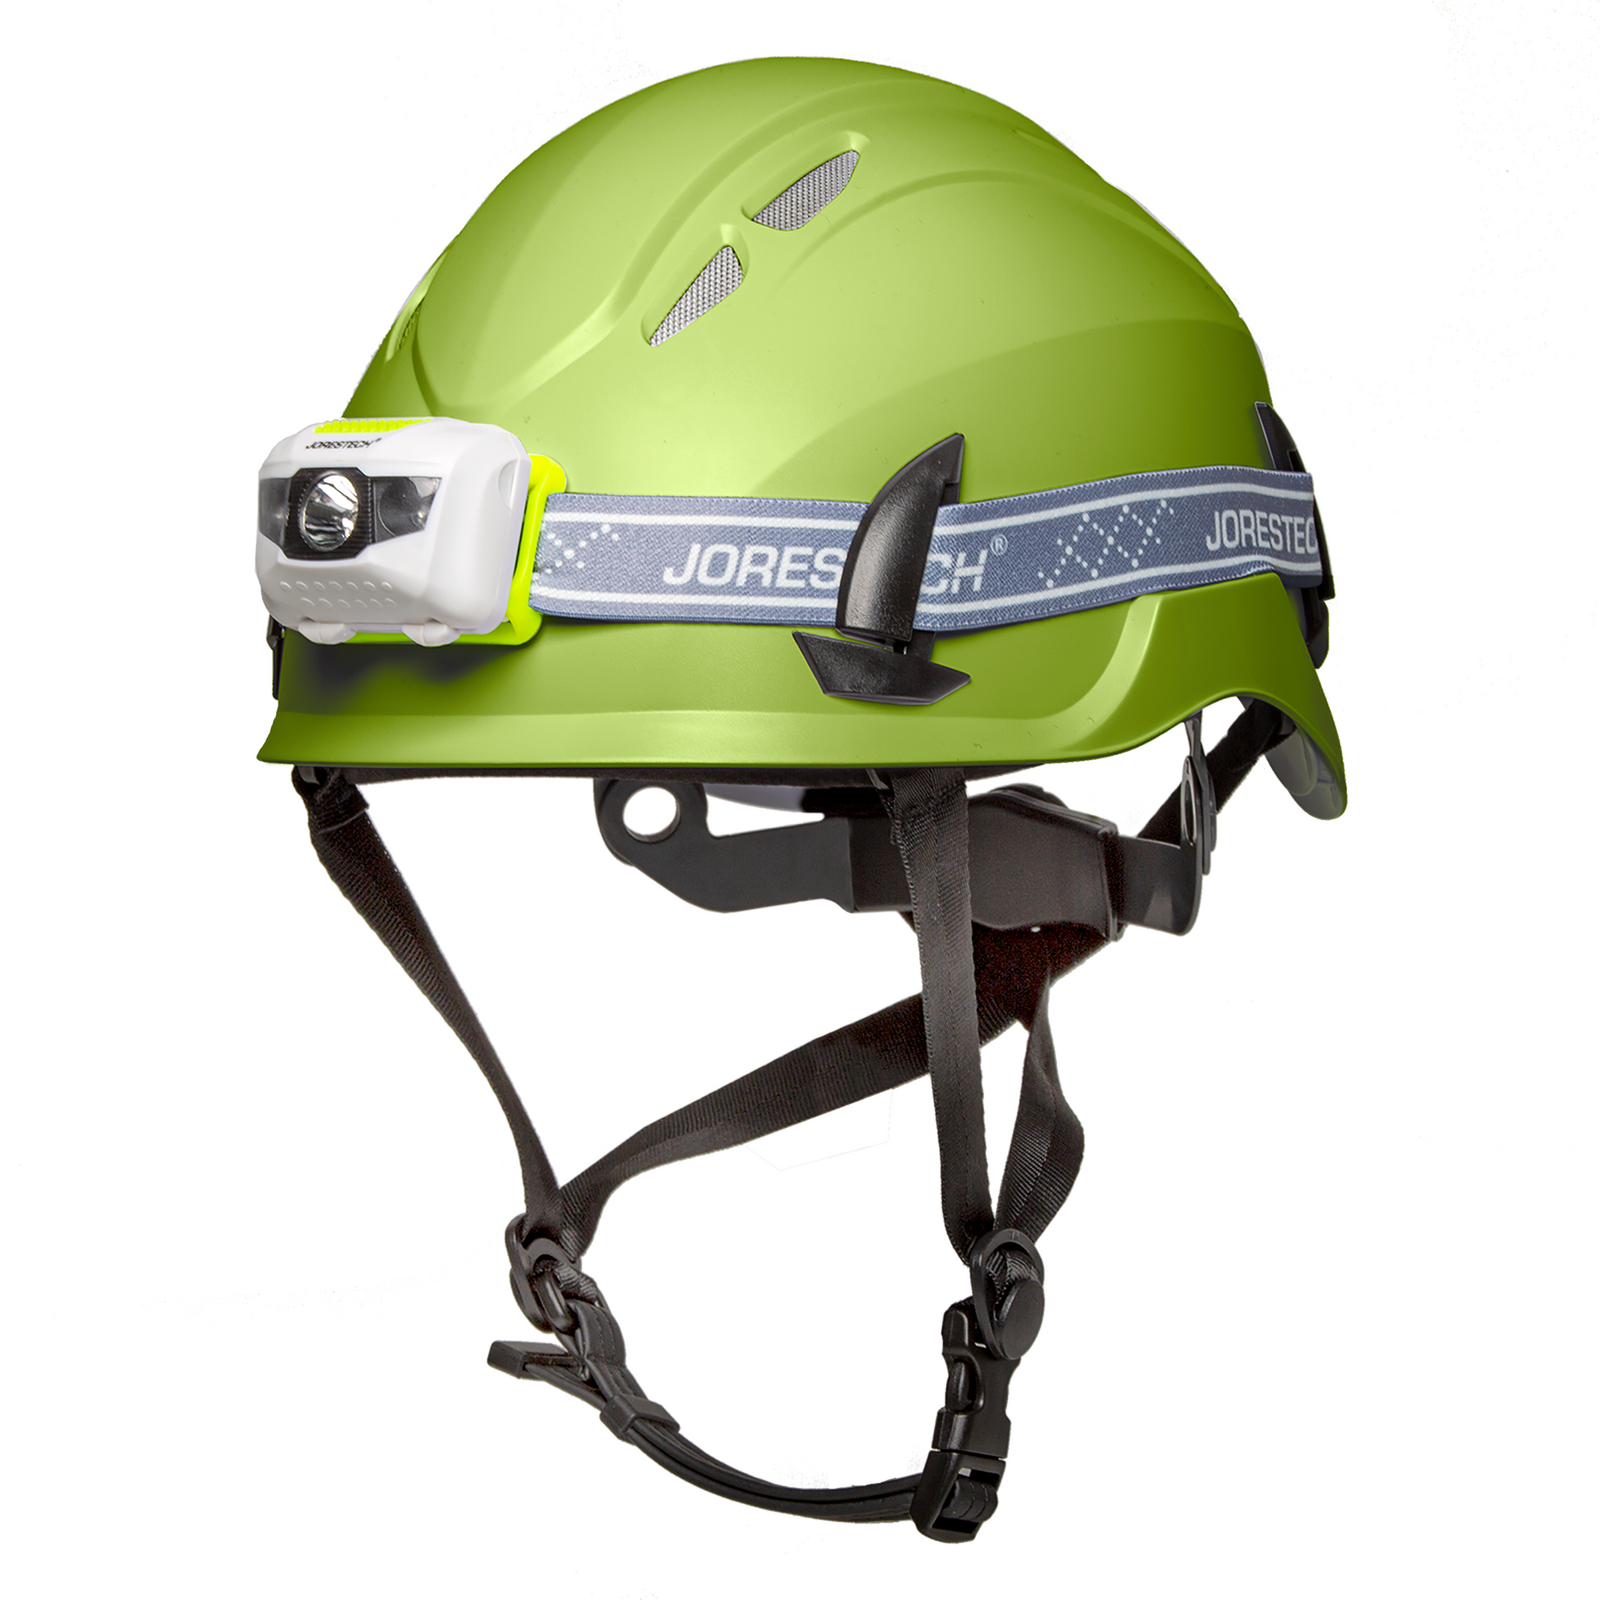 Diagonal view of a lime ventilated JORESTECH ANSI compliant hard hat Class 1 Type C with chin strap and a white water resistant headlamp bundle